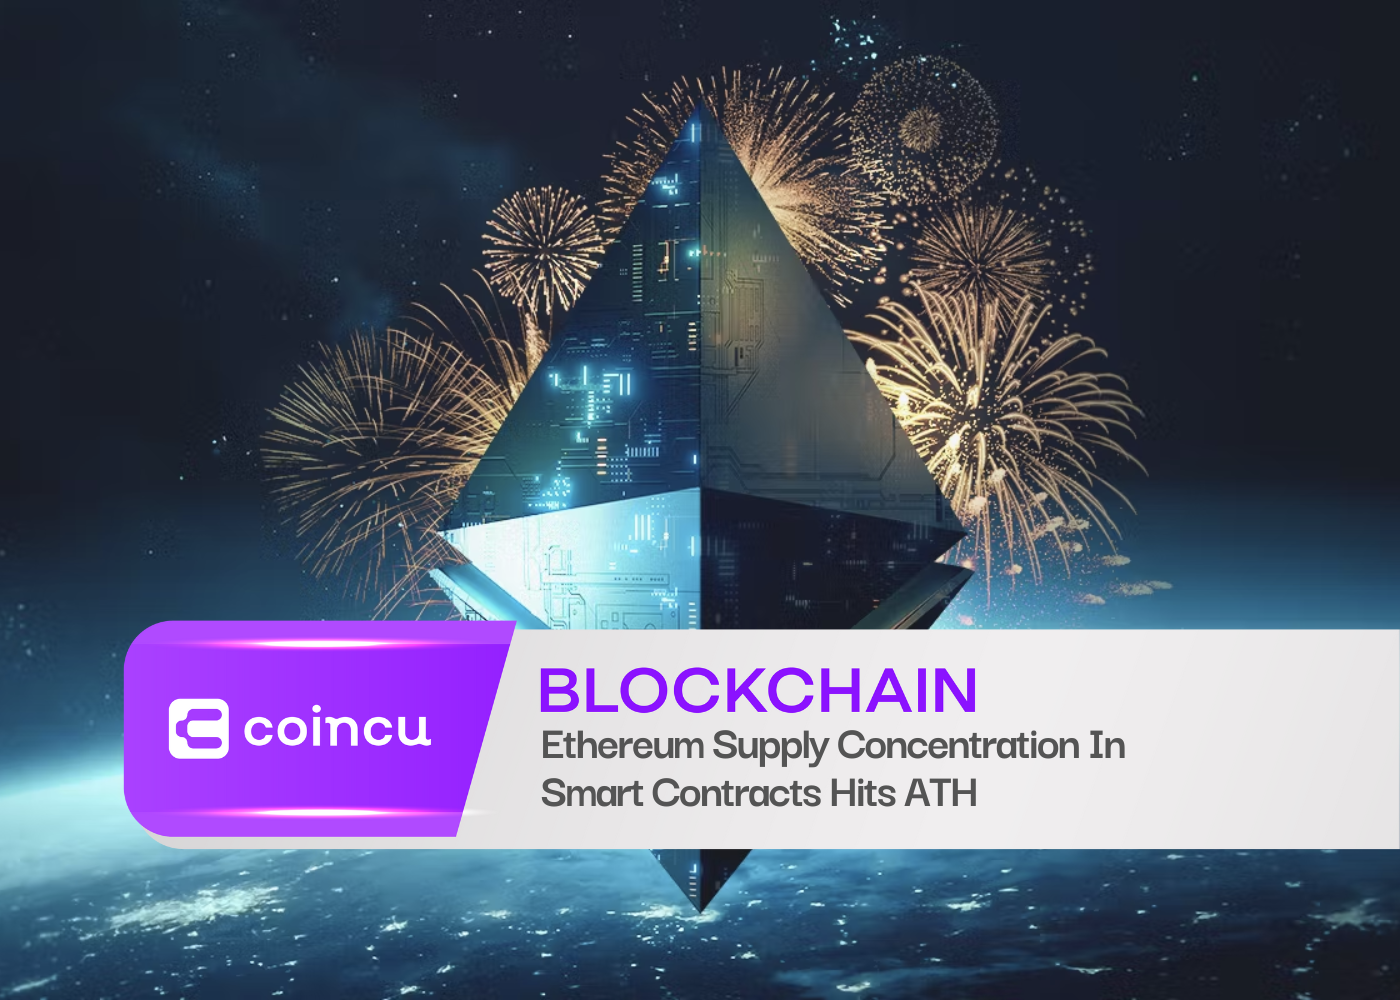 Ethereum Supply Concentration In Smart Contracts Hits ATH